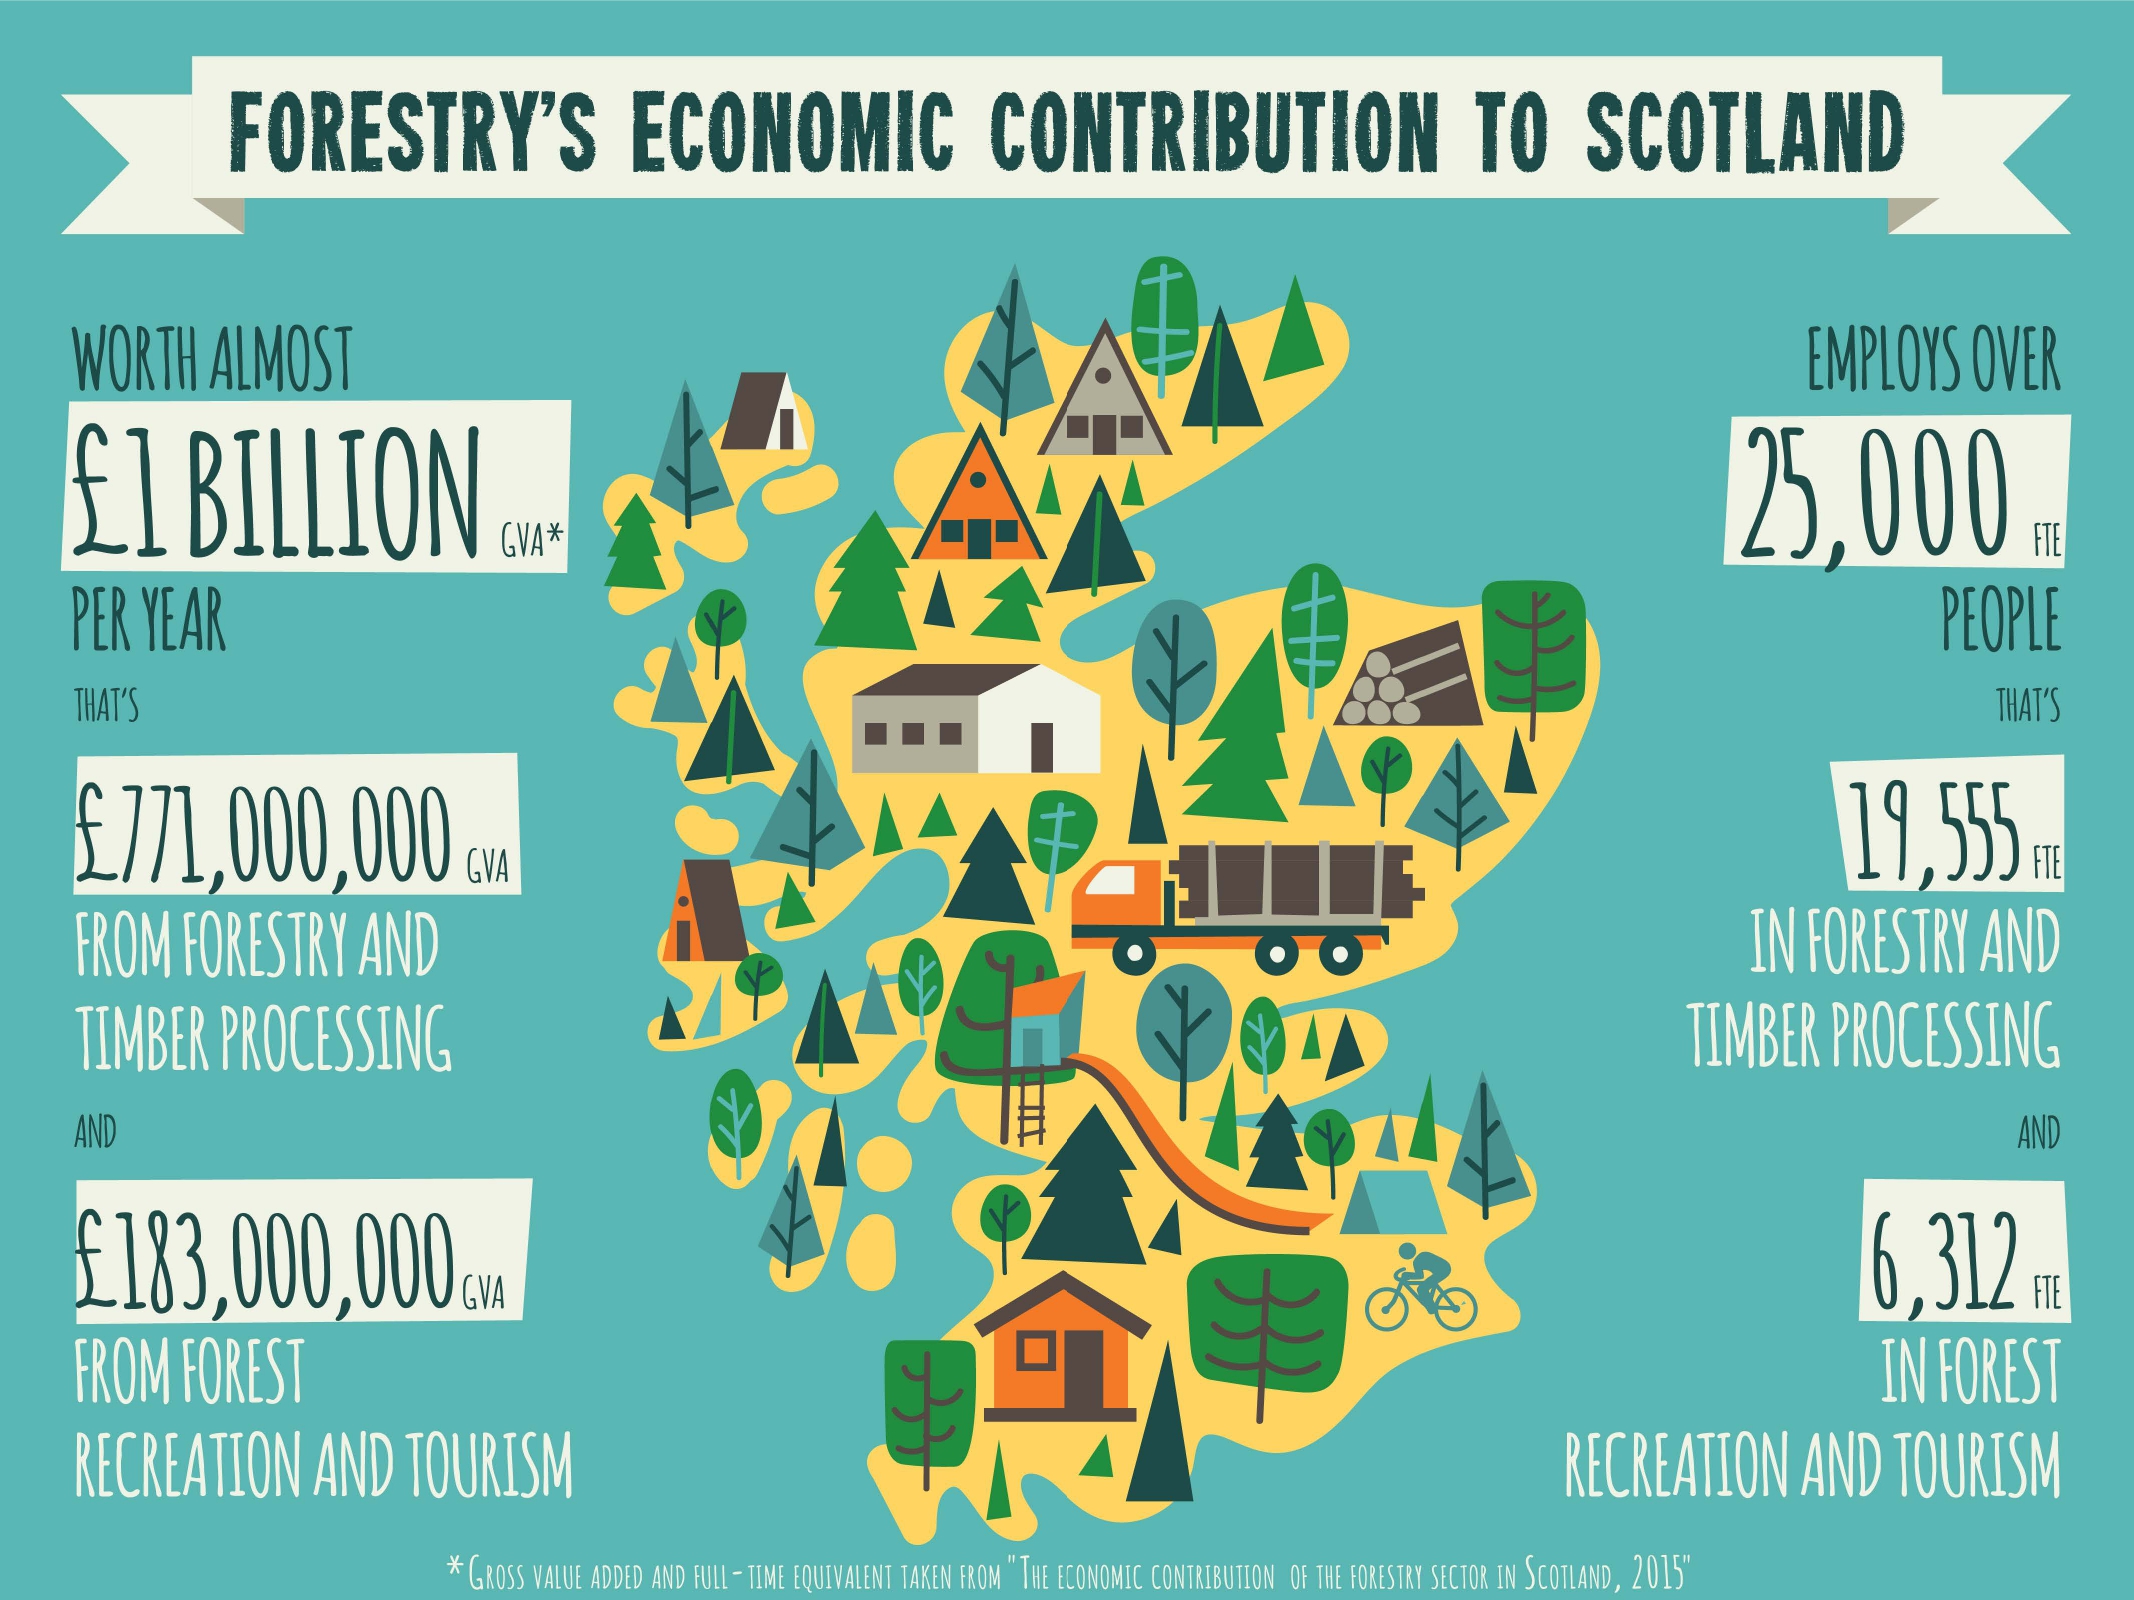 Stats about the contribution forestry makes to Scotland's economy